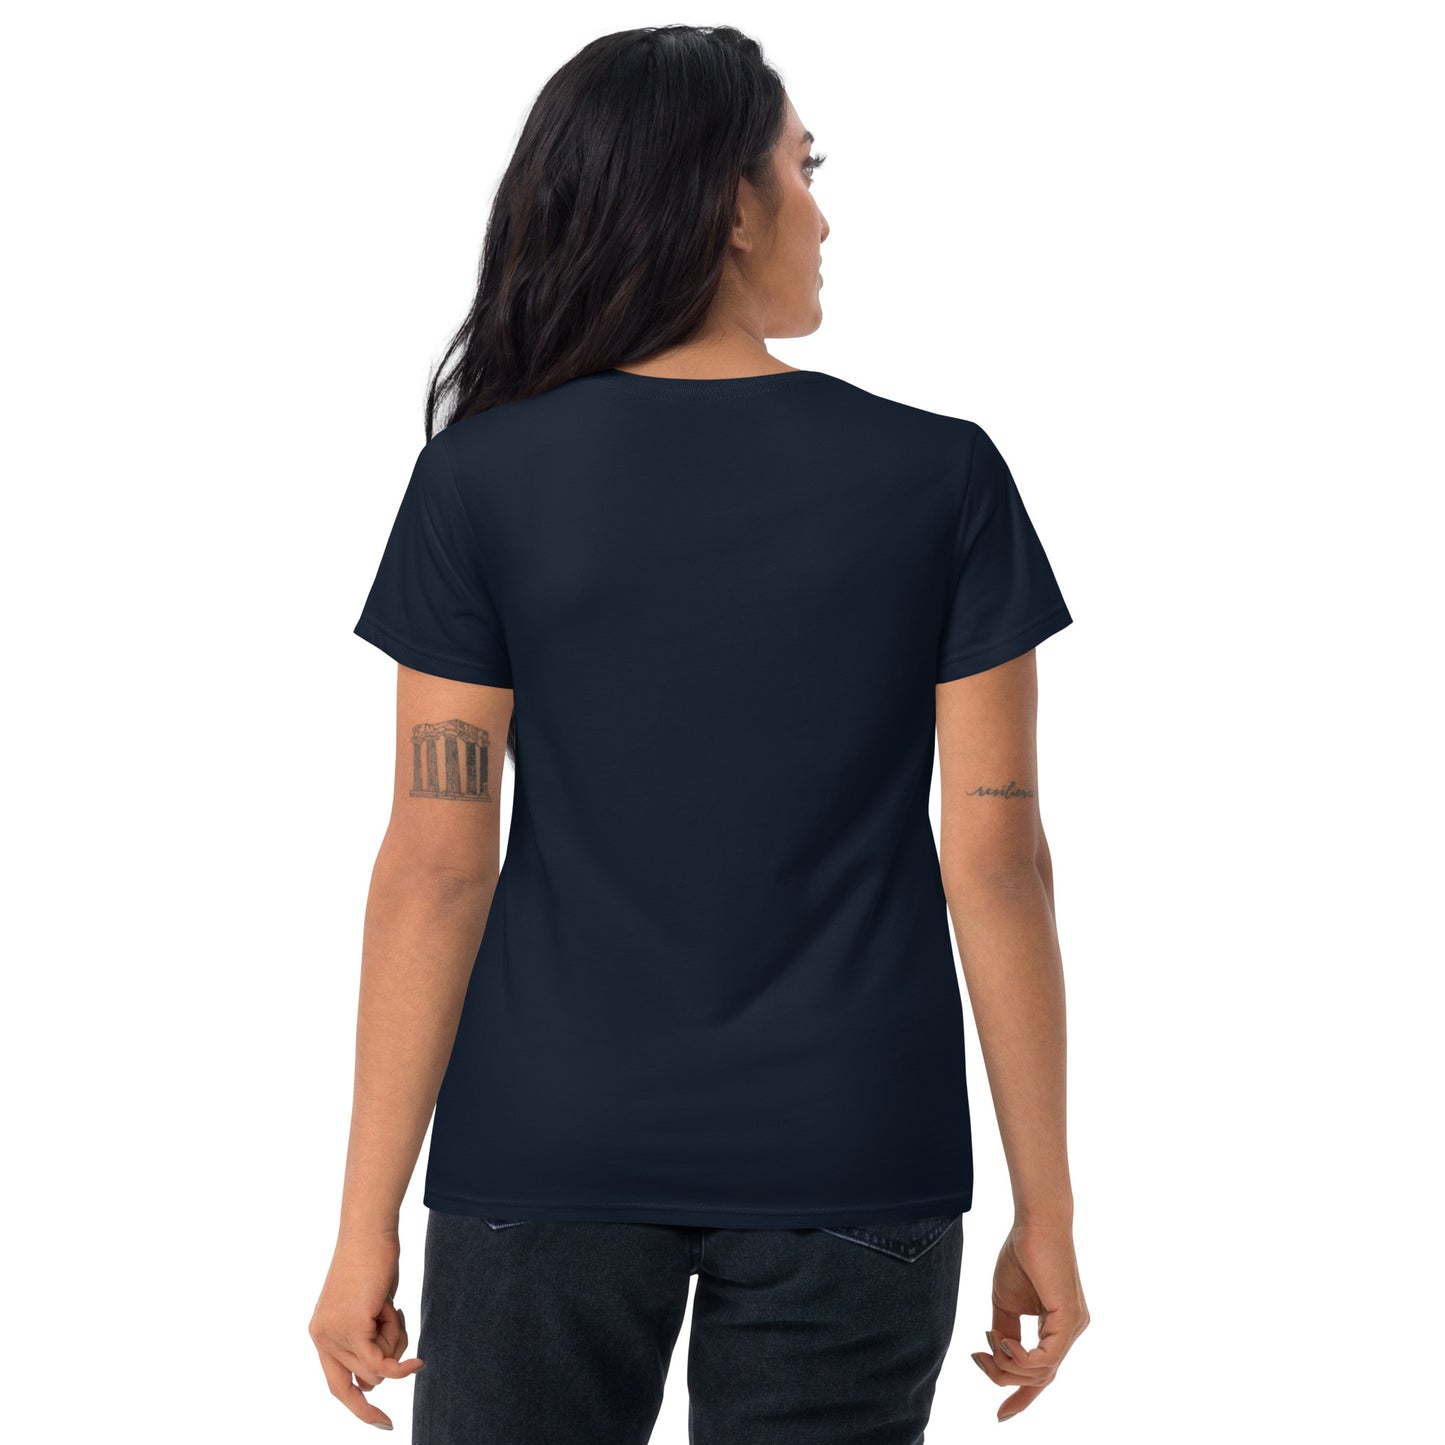 Look the other way - Women's T-shirt